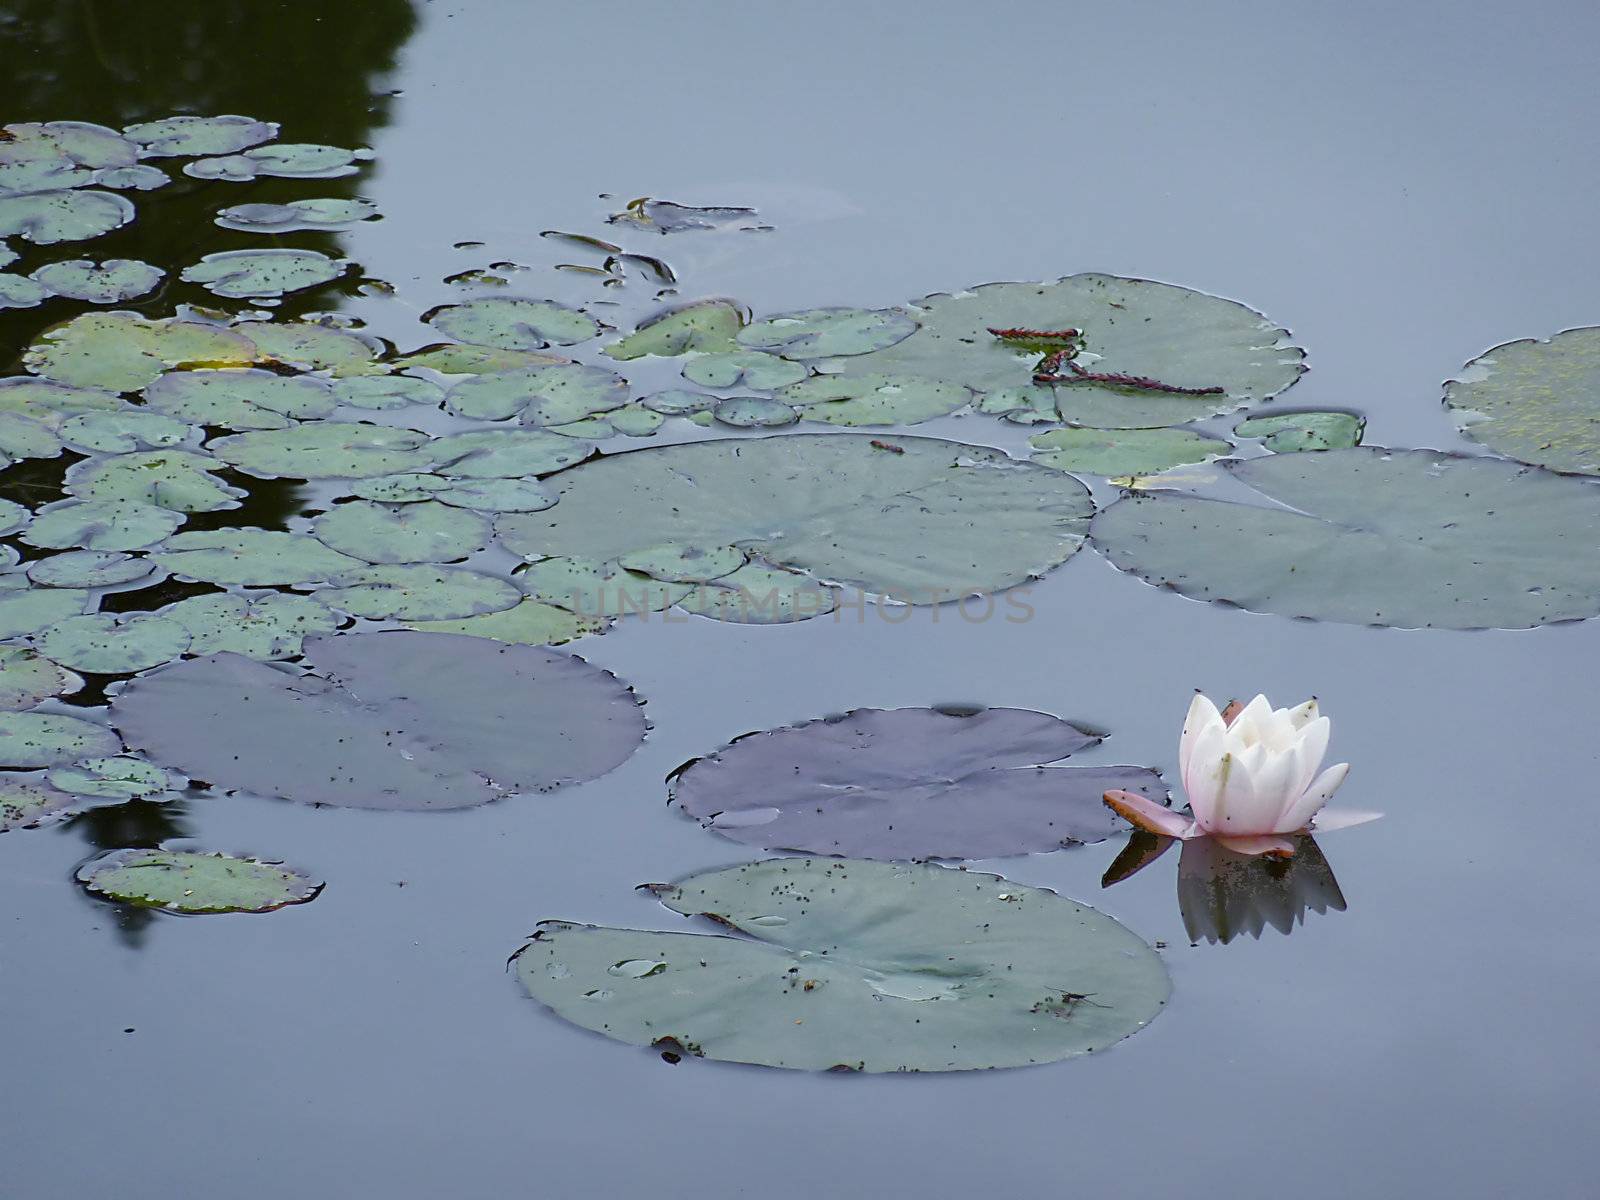 One single lotus flower on a pond with leaves floating around